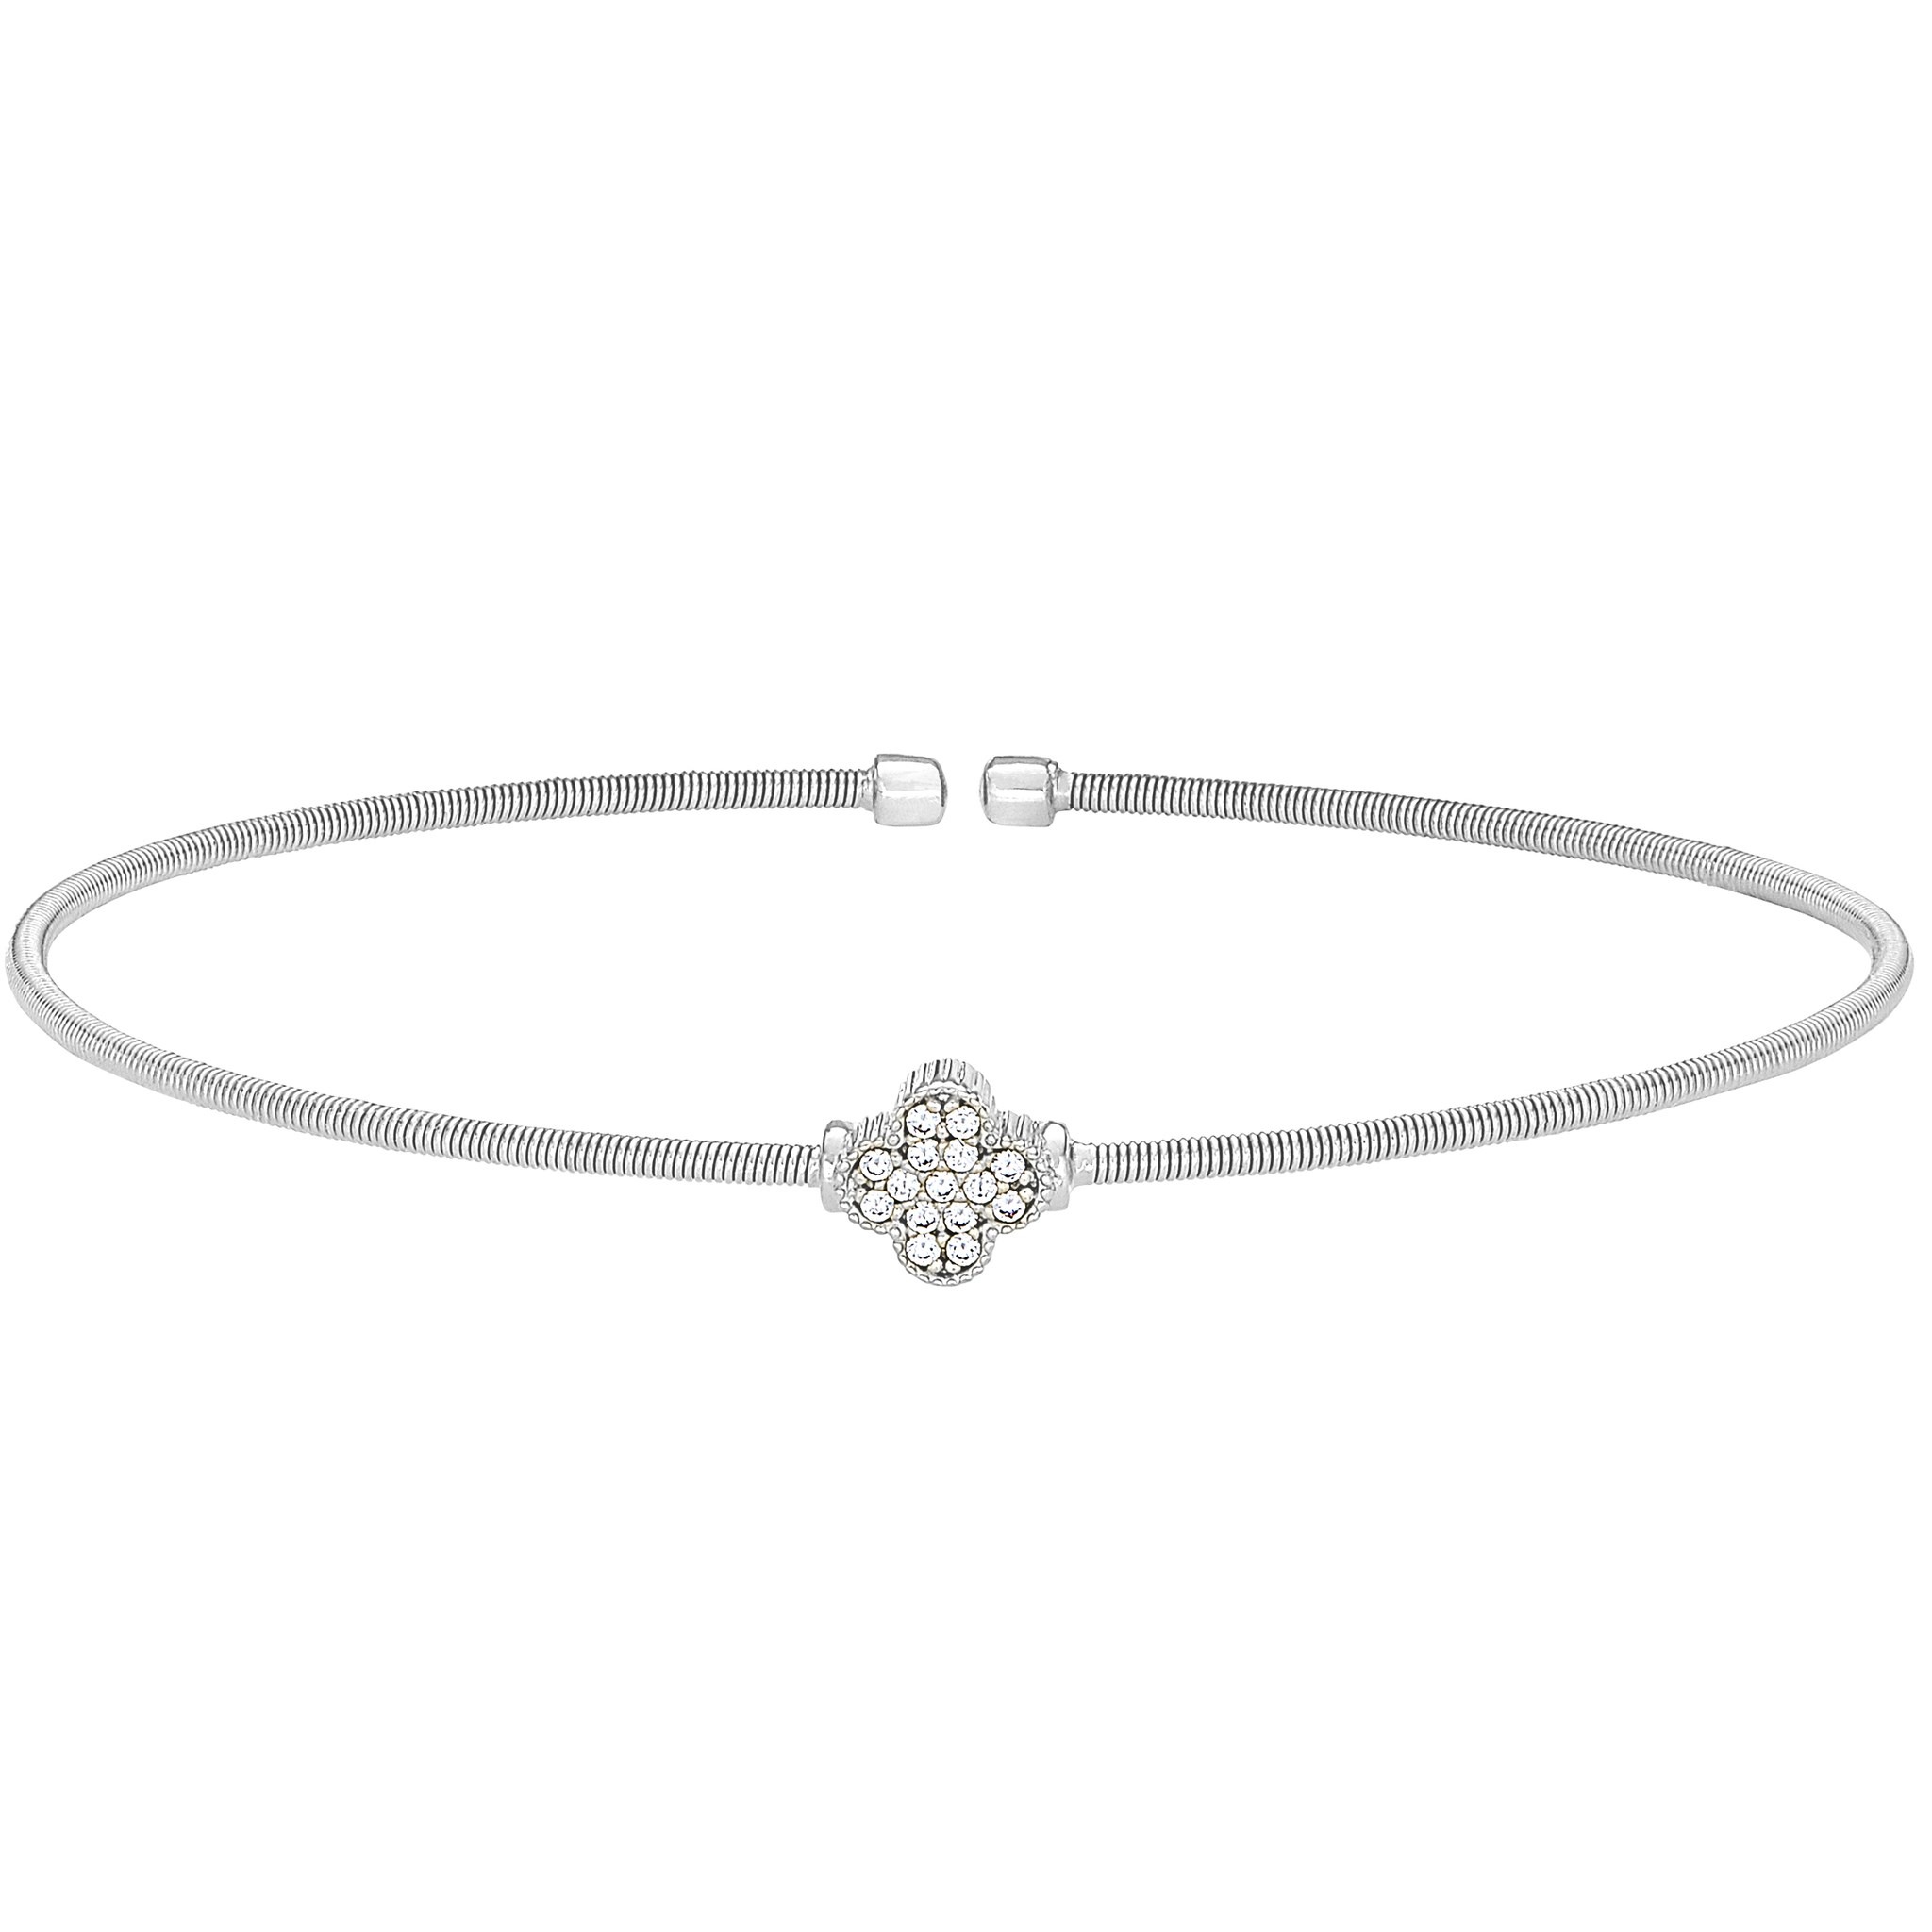 Rhodium Finish Sterling Silver Cable Cuff Bracelet with Clover Design